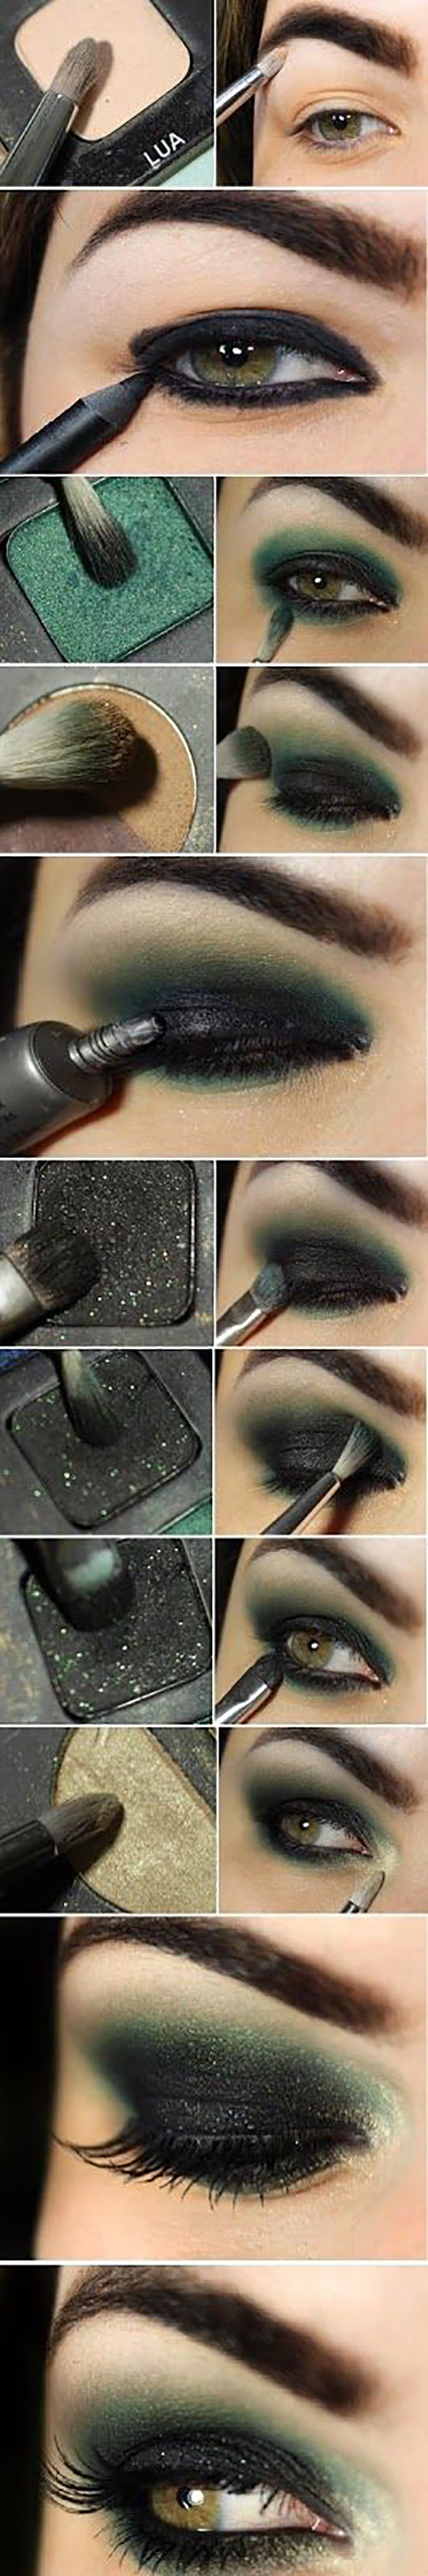 Dark Shadow Eye Makeup How To Do Smokey Eye Makeup Top 10 Tutorial Pictures For 2019